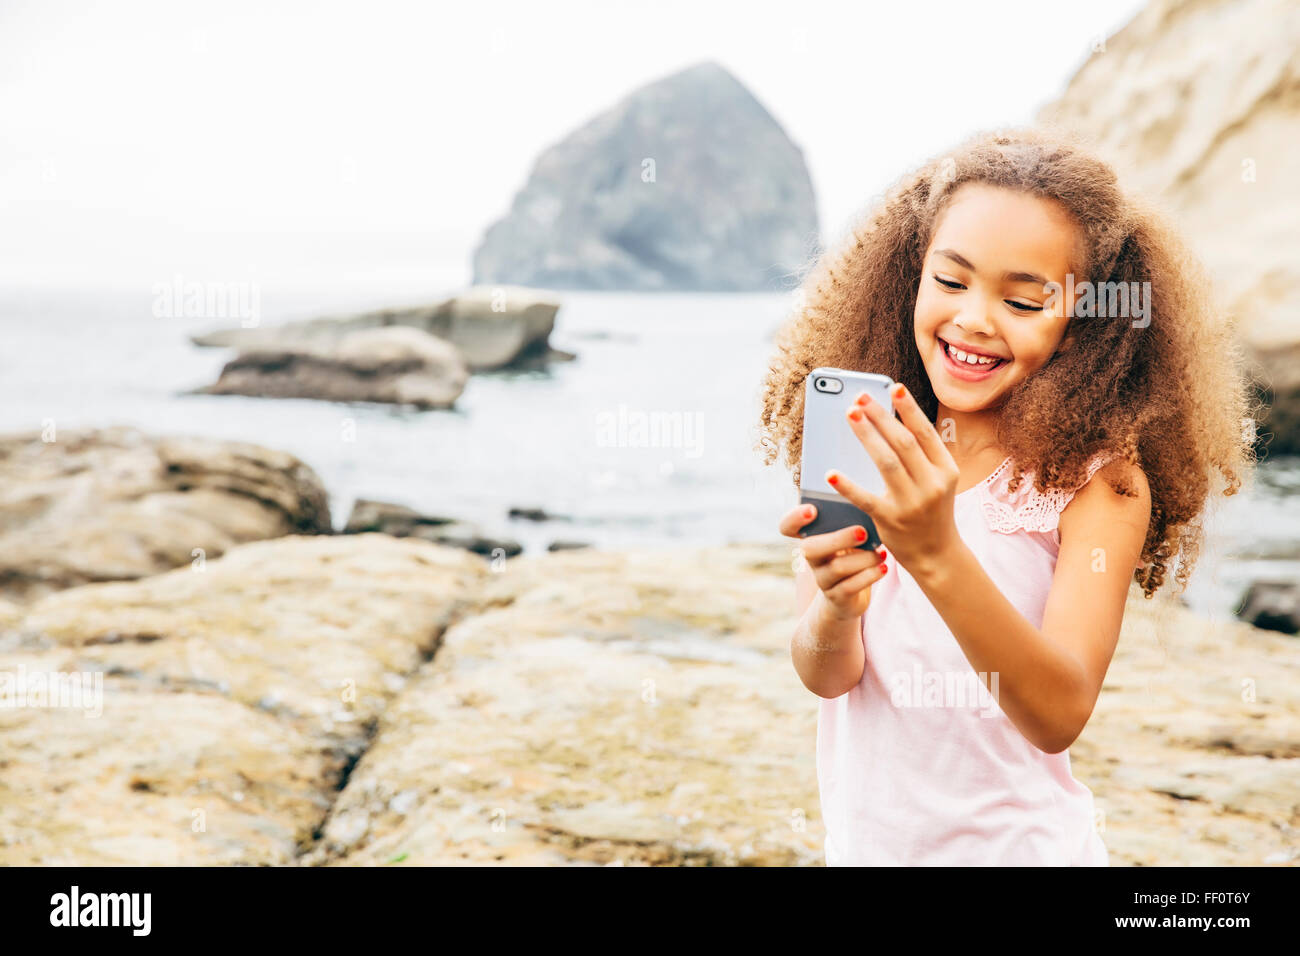 Mixed Race girl using cell phone on beach Banque D'Images